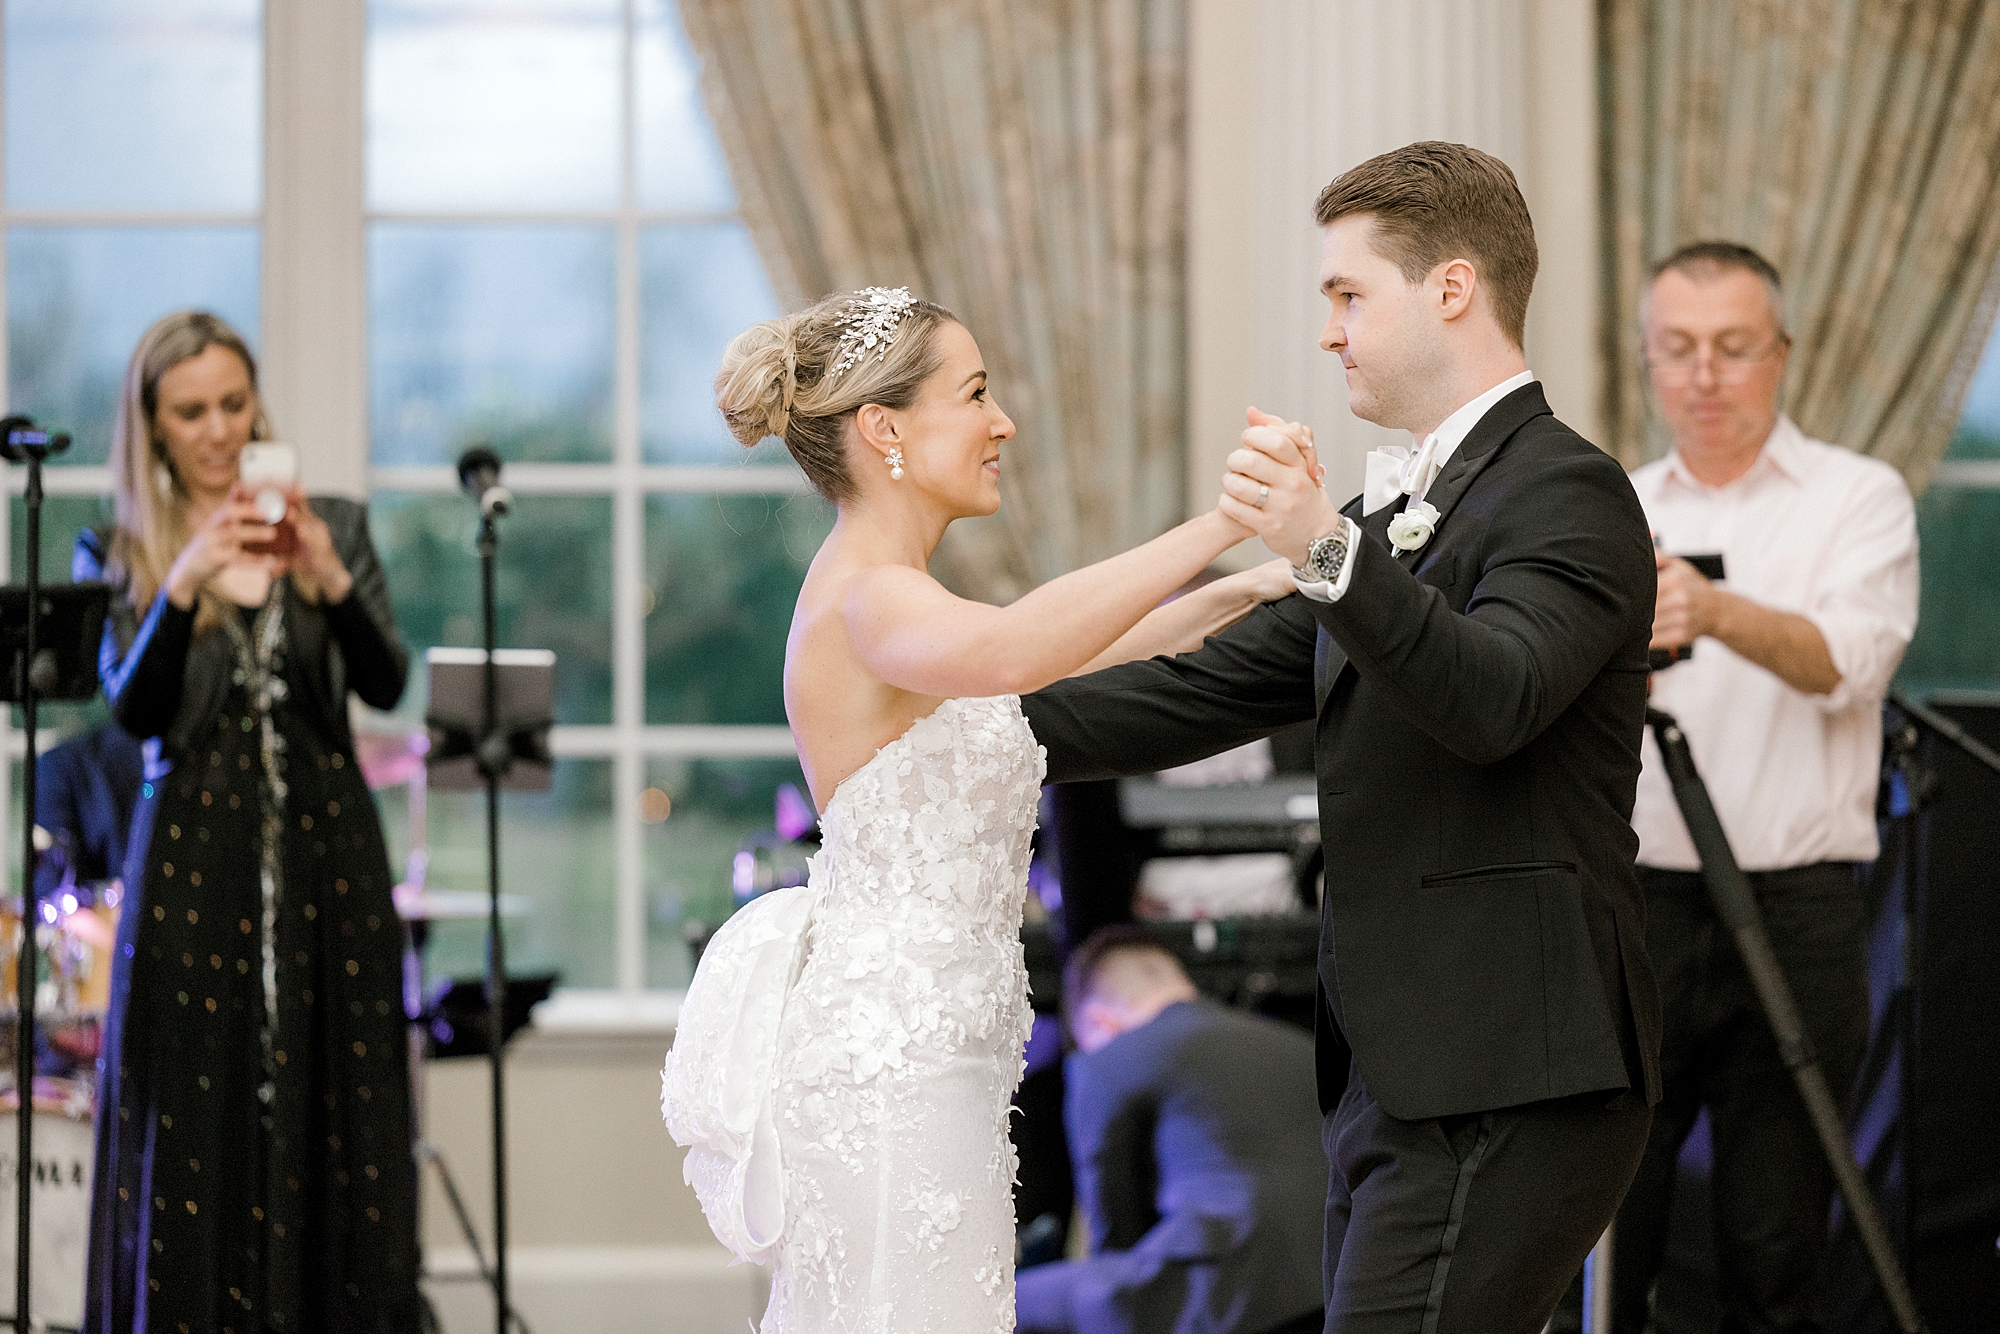 newlyweds have first dance at New Jersey wedding reception